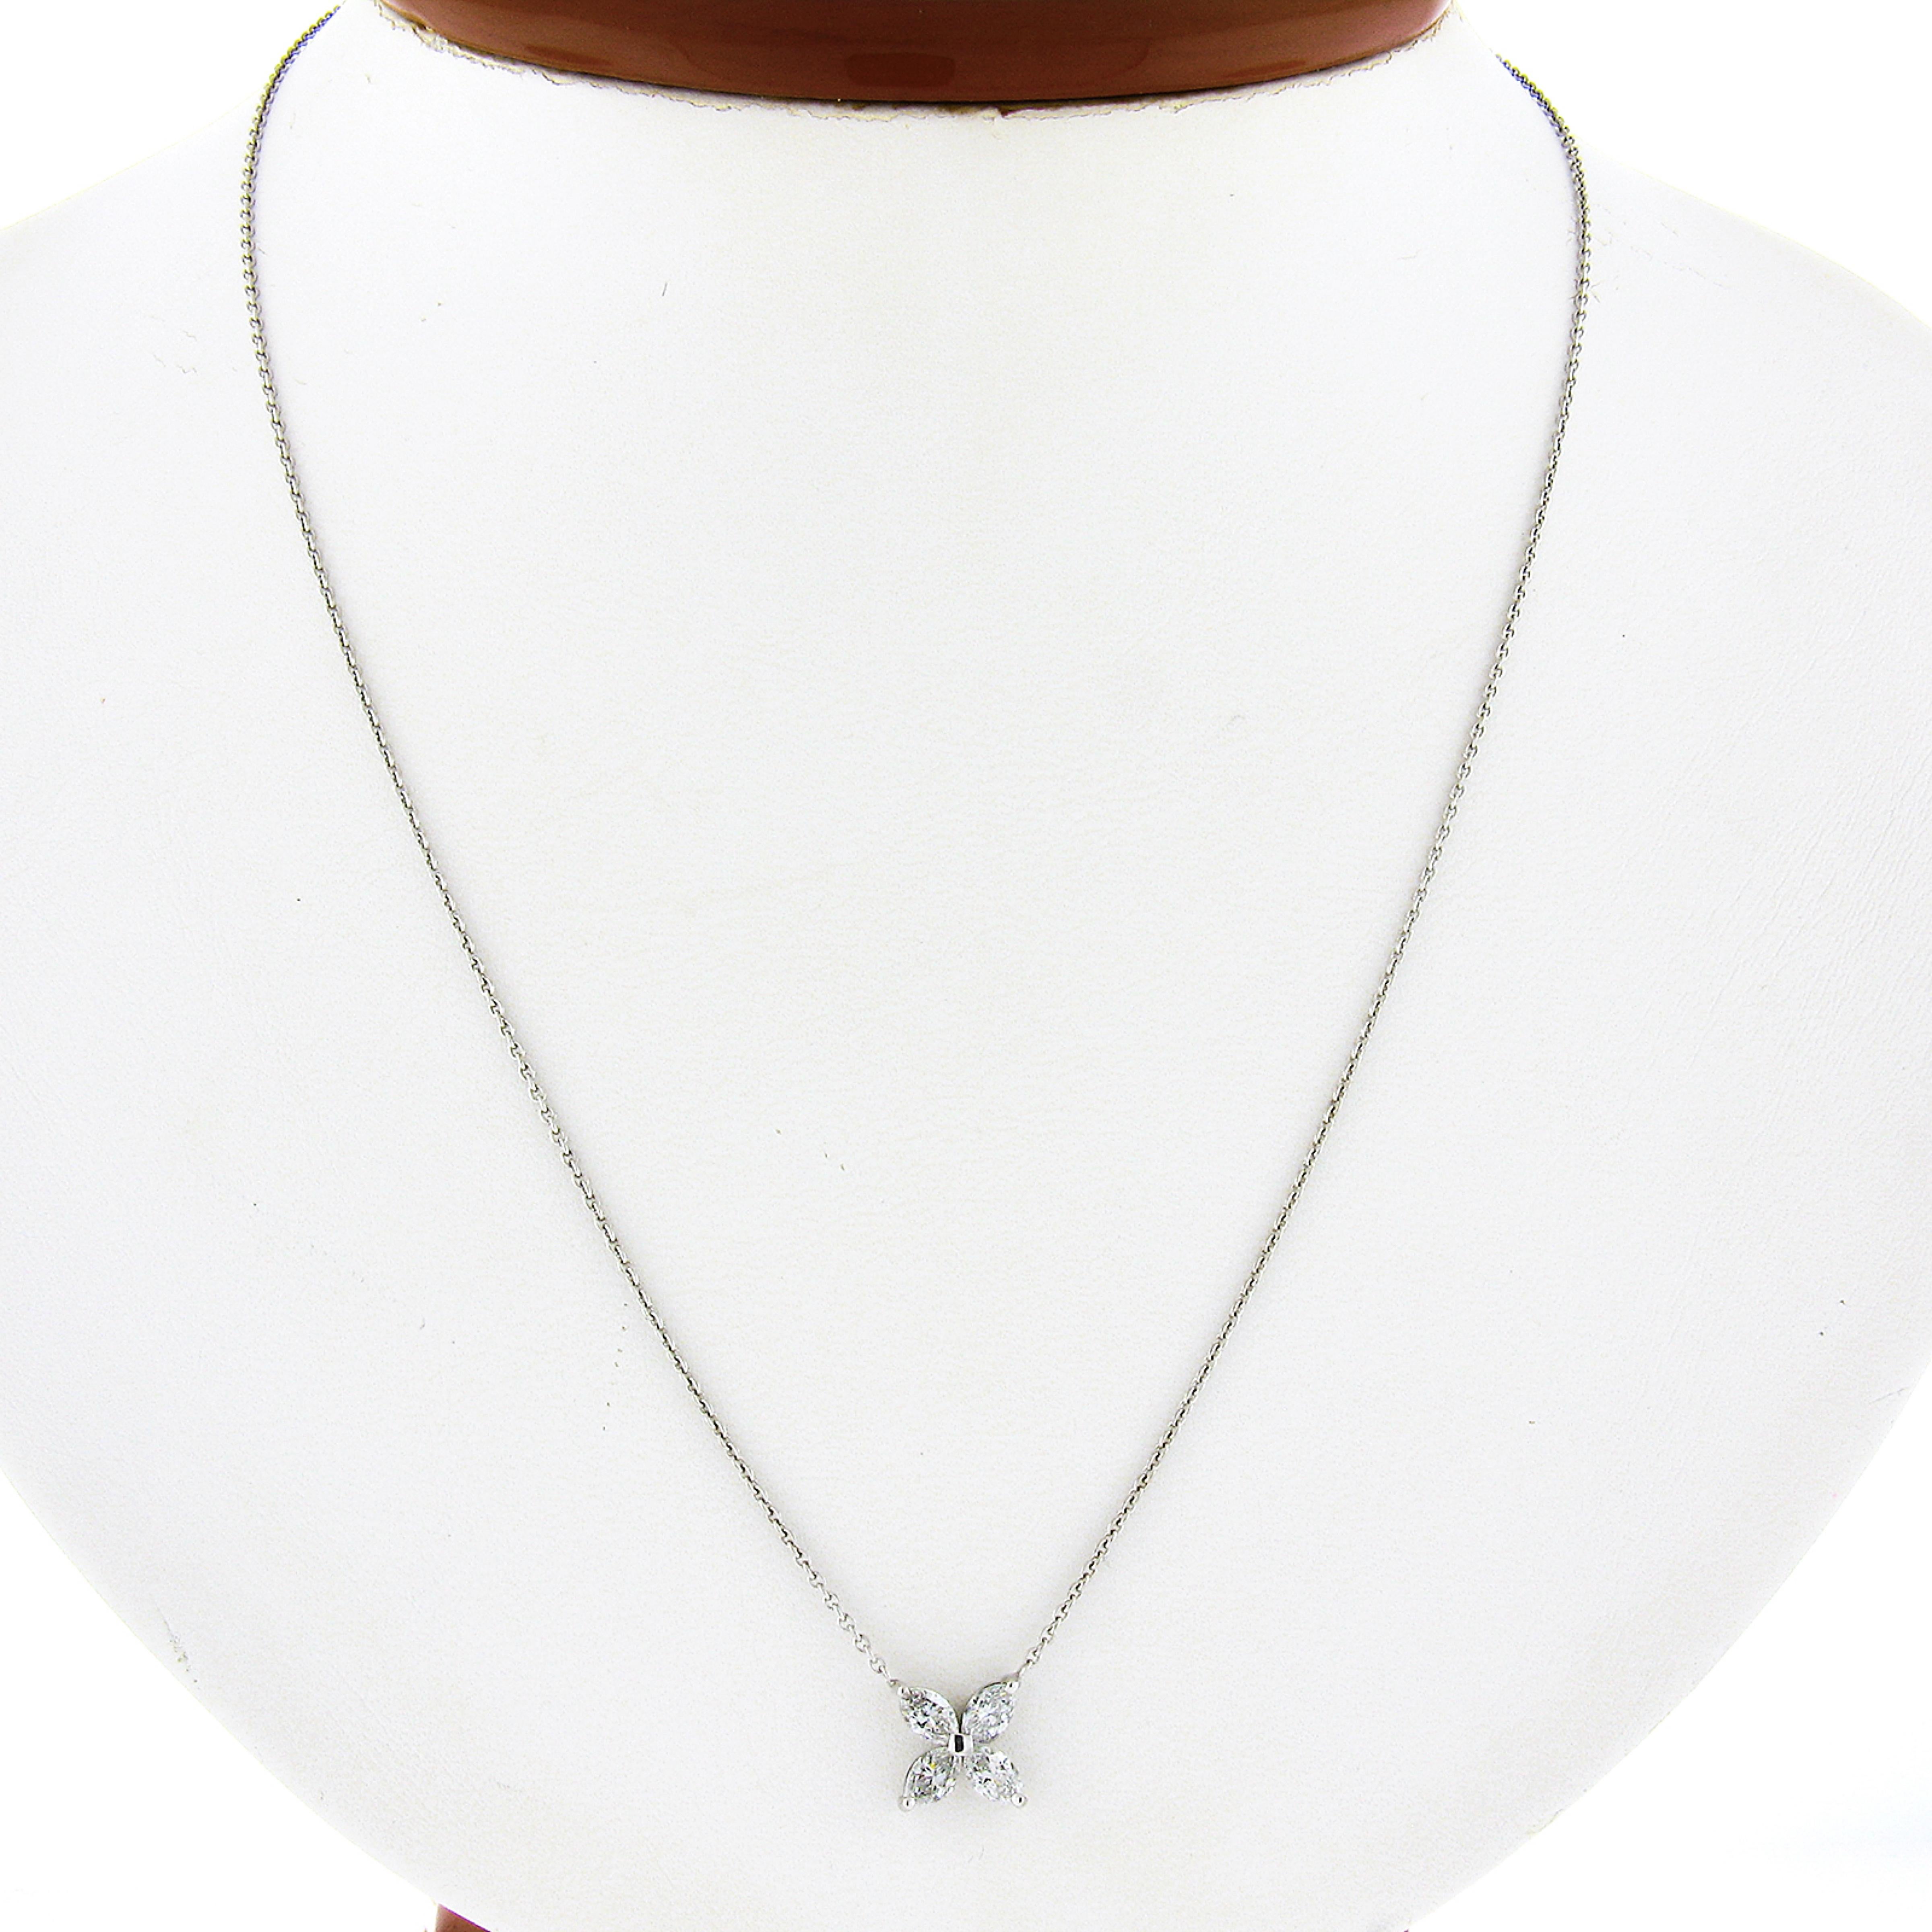 This gorgeous pendant necklace is newly crafted in solid platinum, and features a lovely flower-shaped pendant that consists of 4 marquise cut diamonds. The fiery diamonds are perfectly prong set on an open basket setting, and total 0.56 carats in